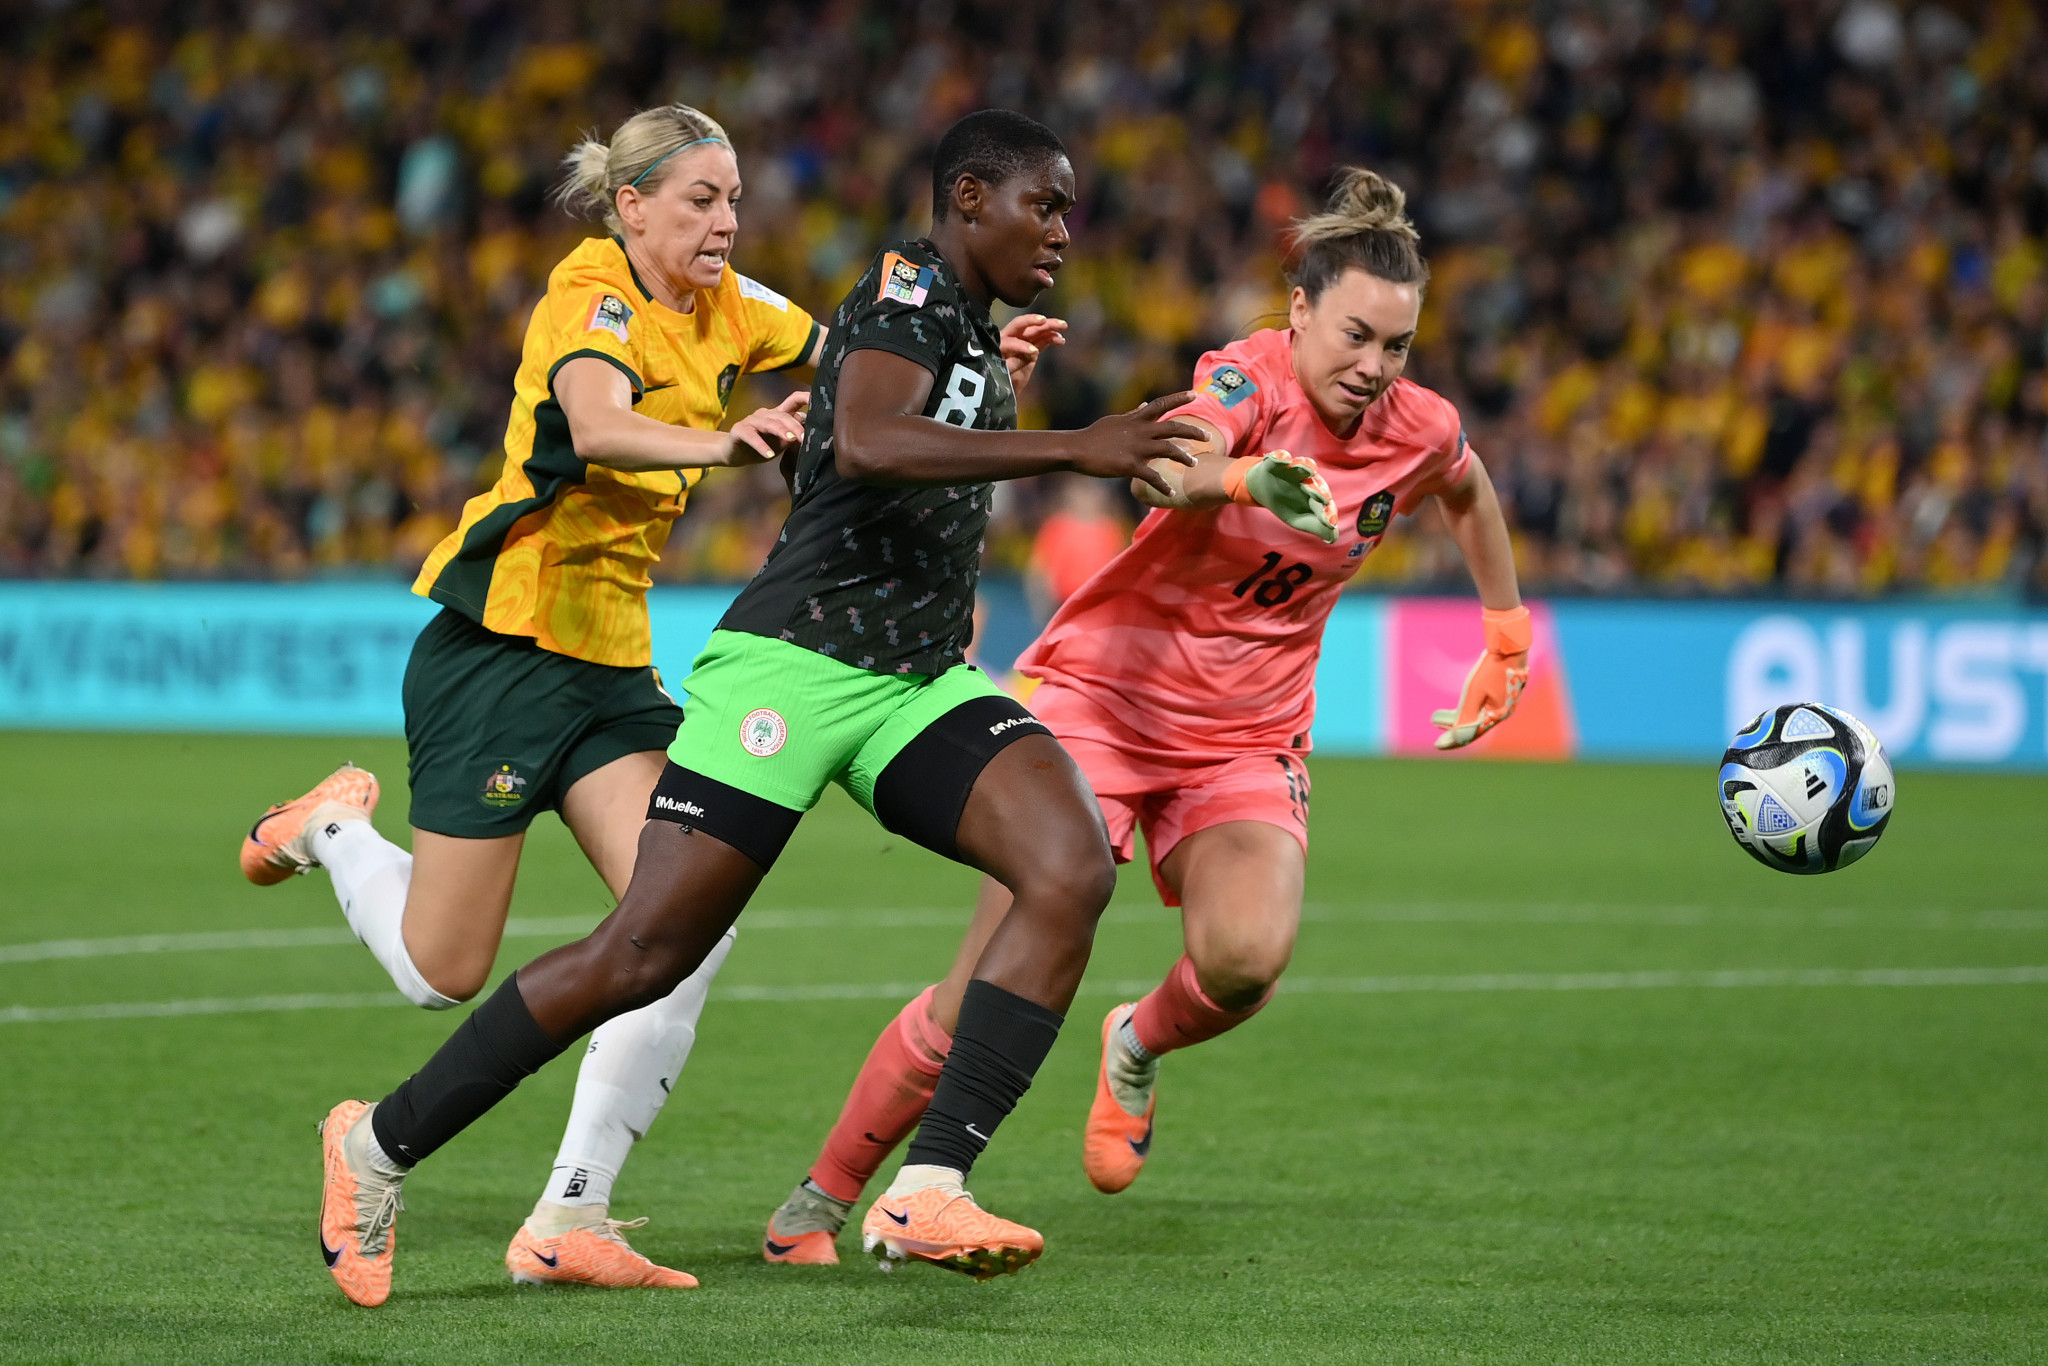 Co-hosts Australia's chances of progressing to the knockout rounds suffered a blow as they lost 3-2 to Nigeria in Brisbane ©Getty Images